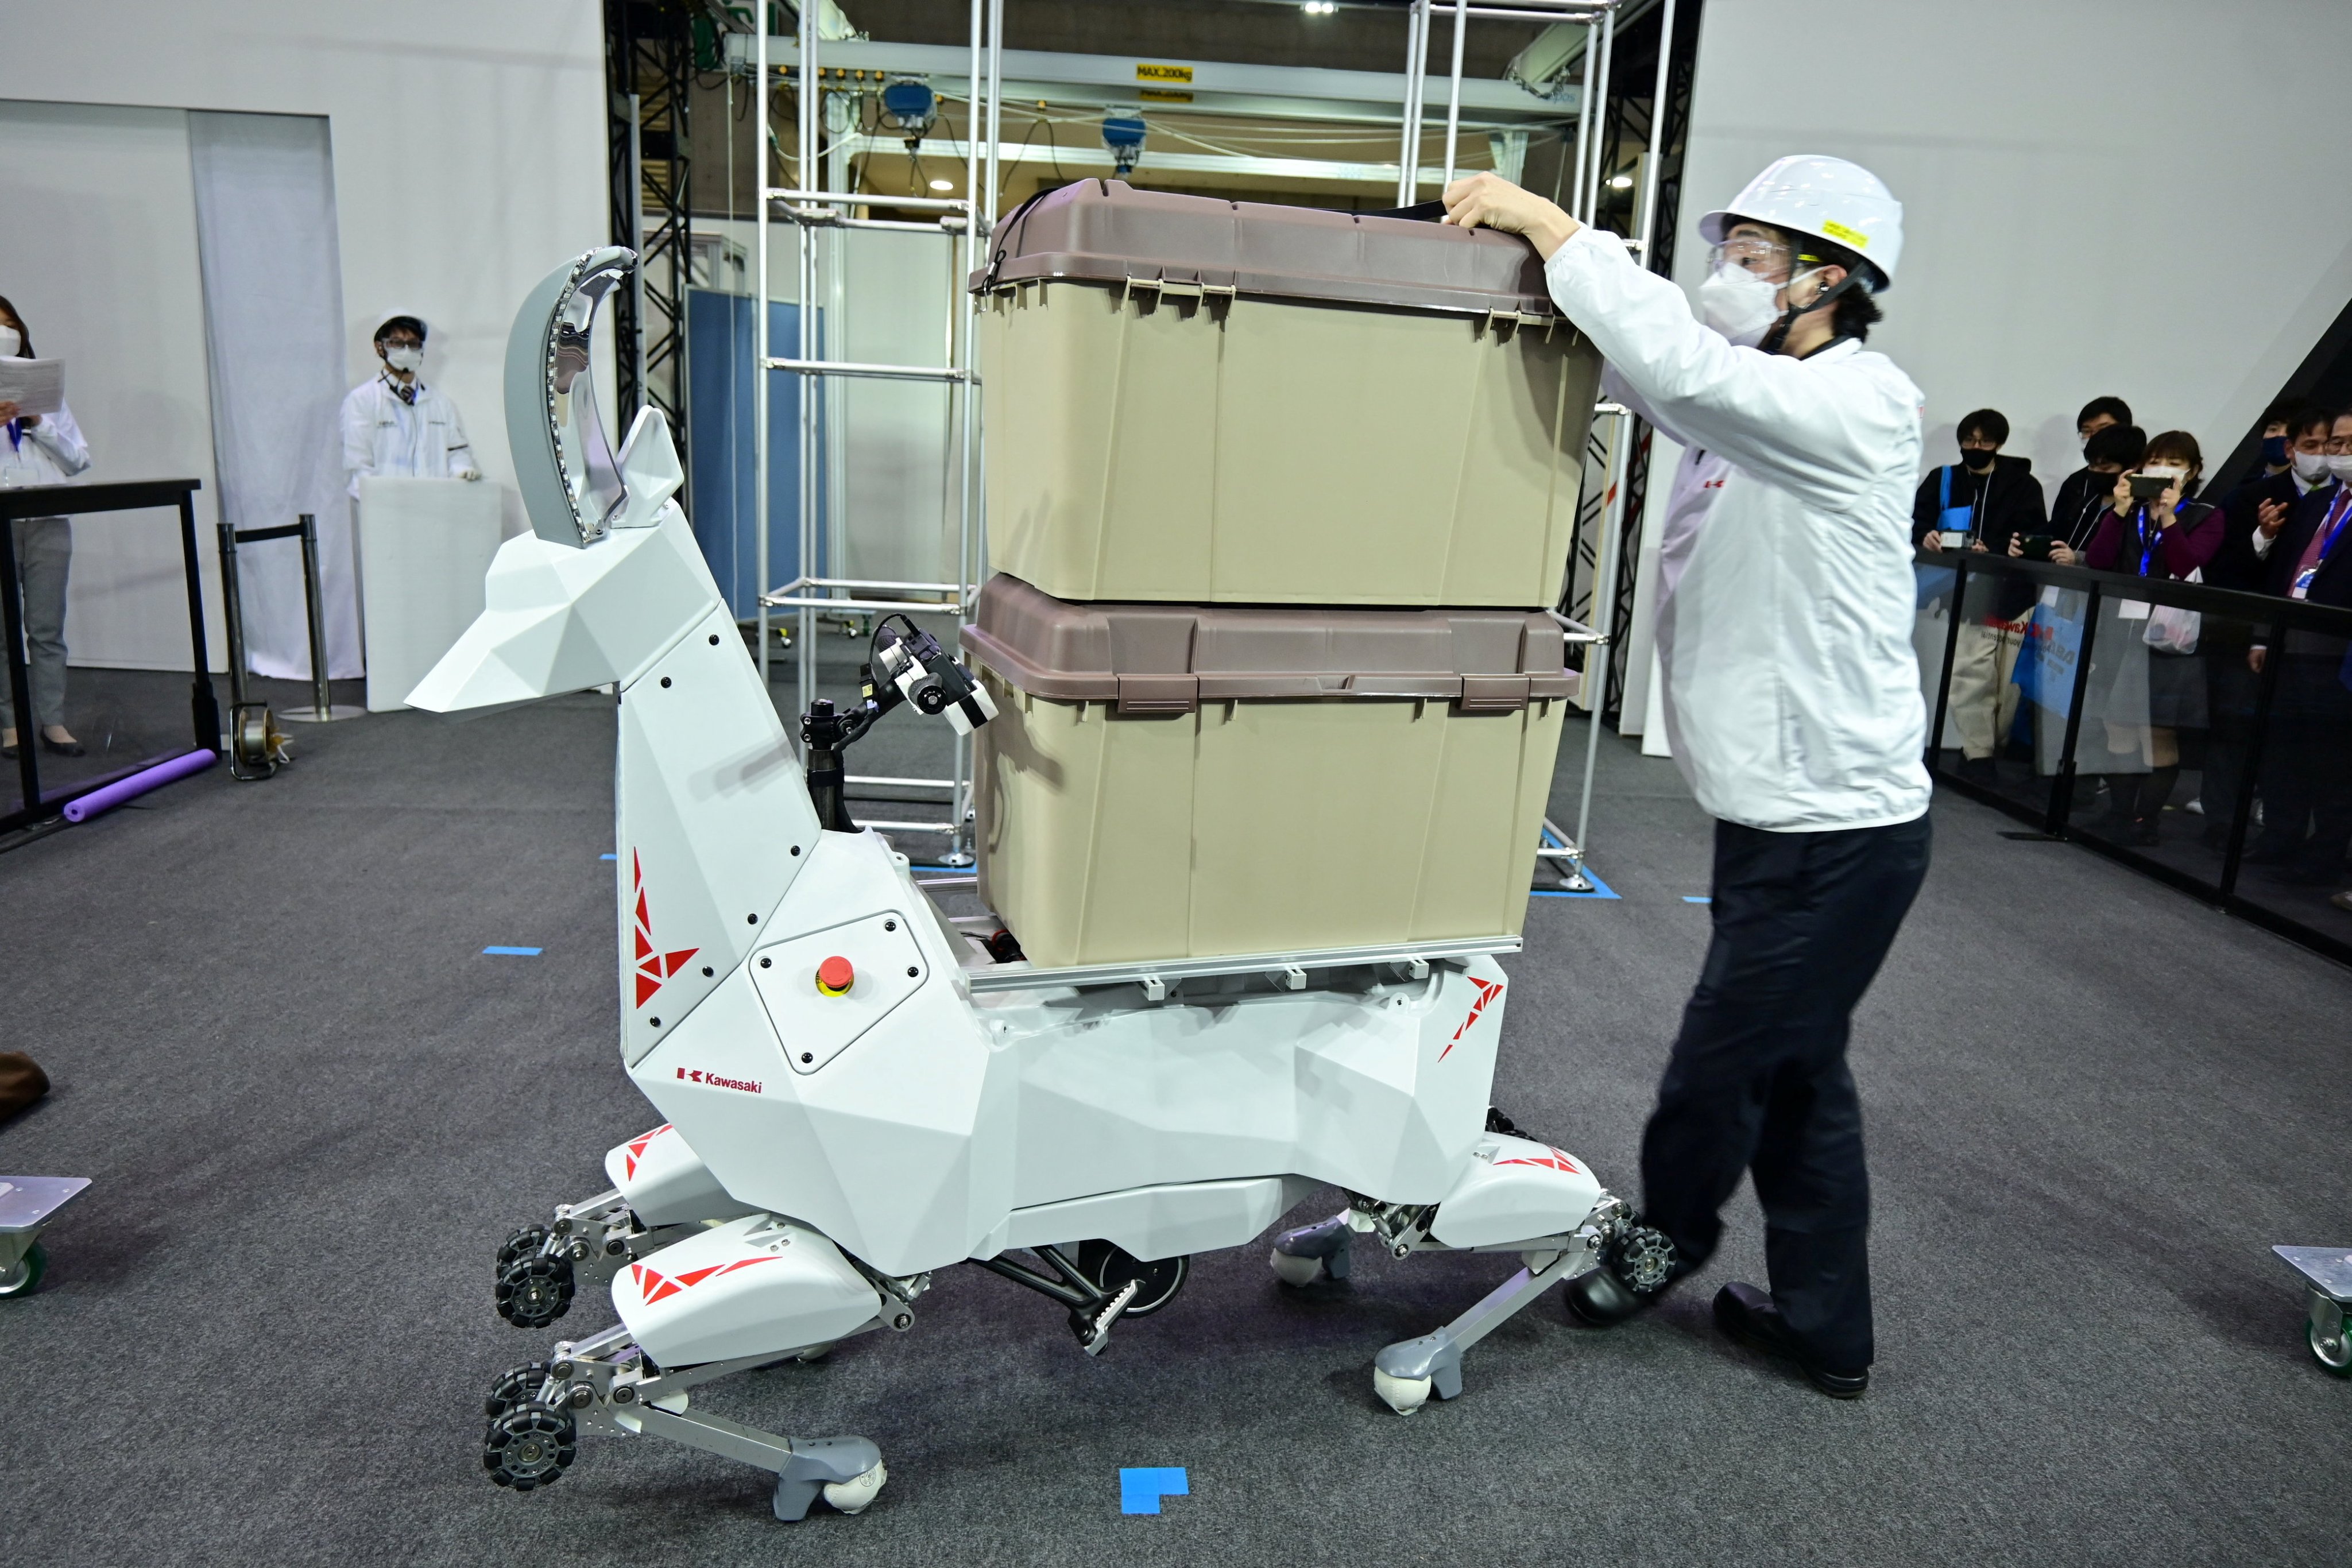 An employee of Japan’s Kawasaki Heavy Industries demonstrates a goat-like robot that can carry goods, in Tokyo, on March 9. By partnering with Microsoft for its industrial metaverse, the company plans to create a digital twin, or virtual replica, of its factories. Photo: Handout from Kawasaki Heavy Industries via Reuters  